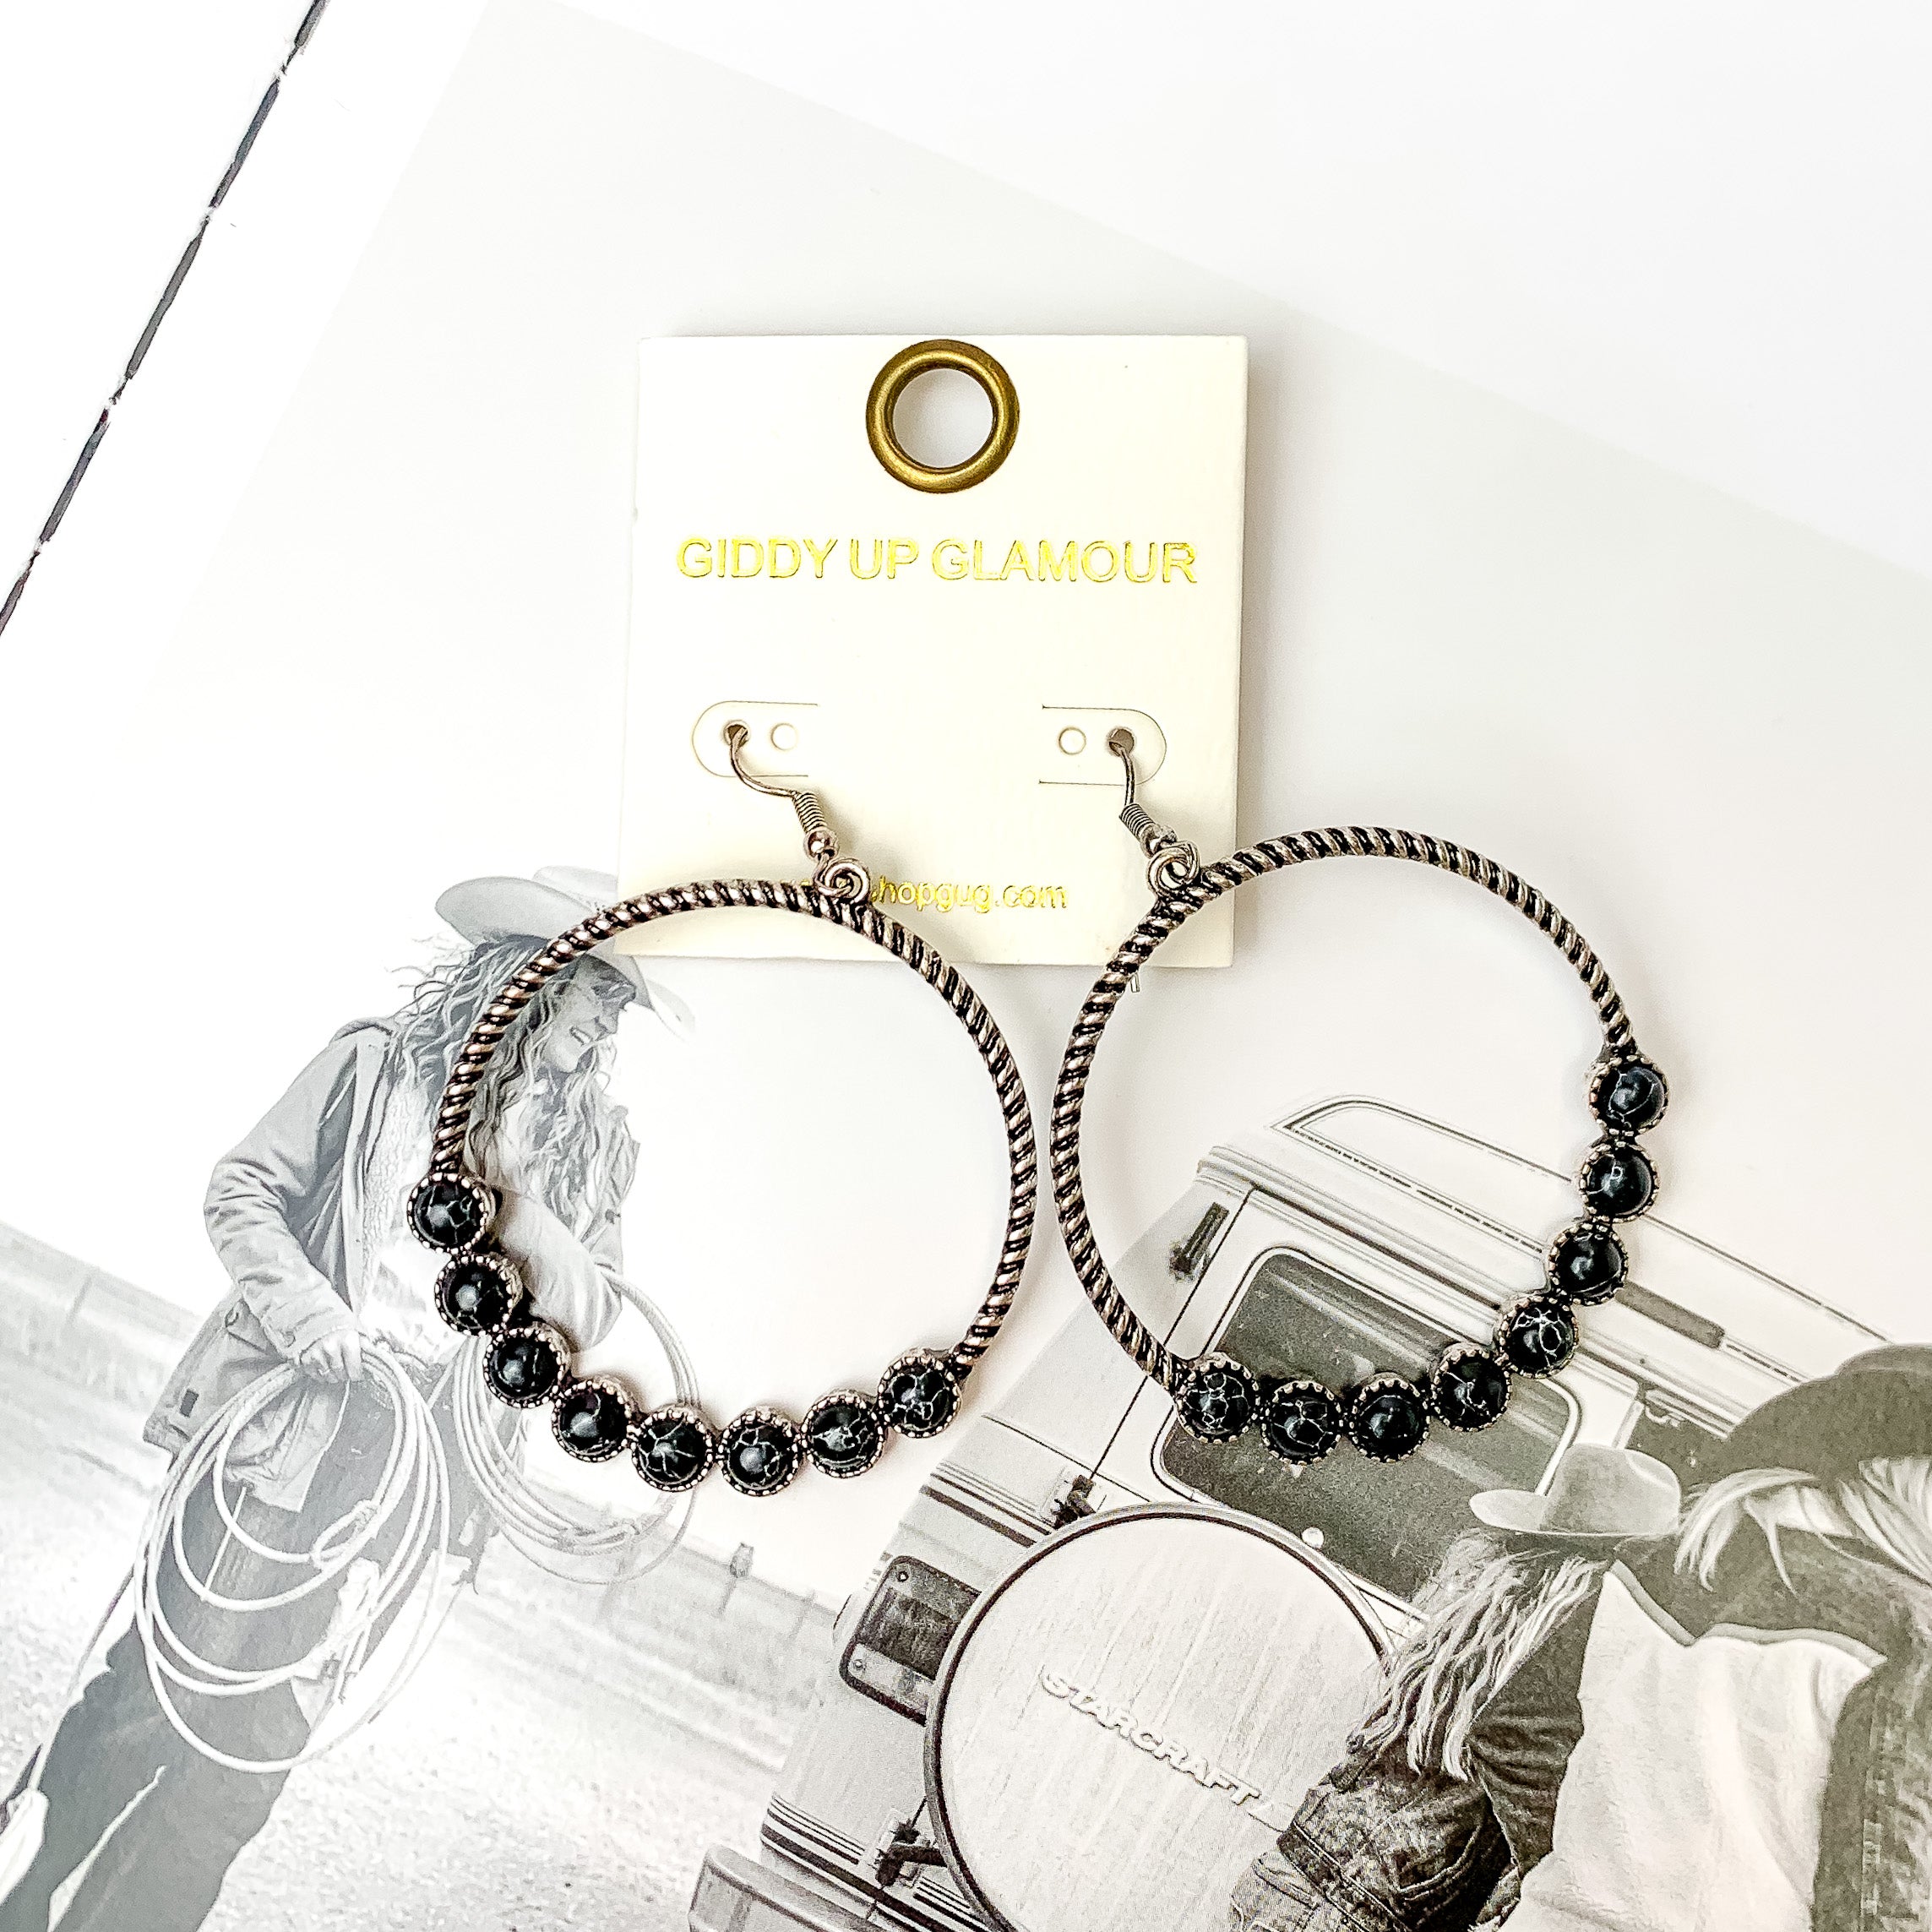 Forever Twisted Hoop Earrings with Stones in Black. Pictured on a book with a western picture on the page.